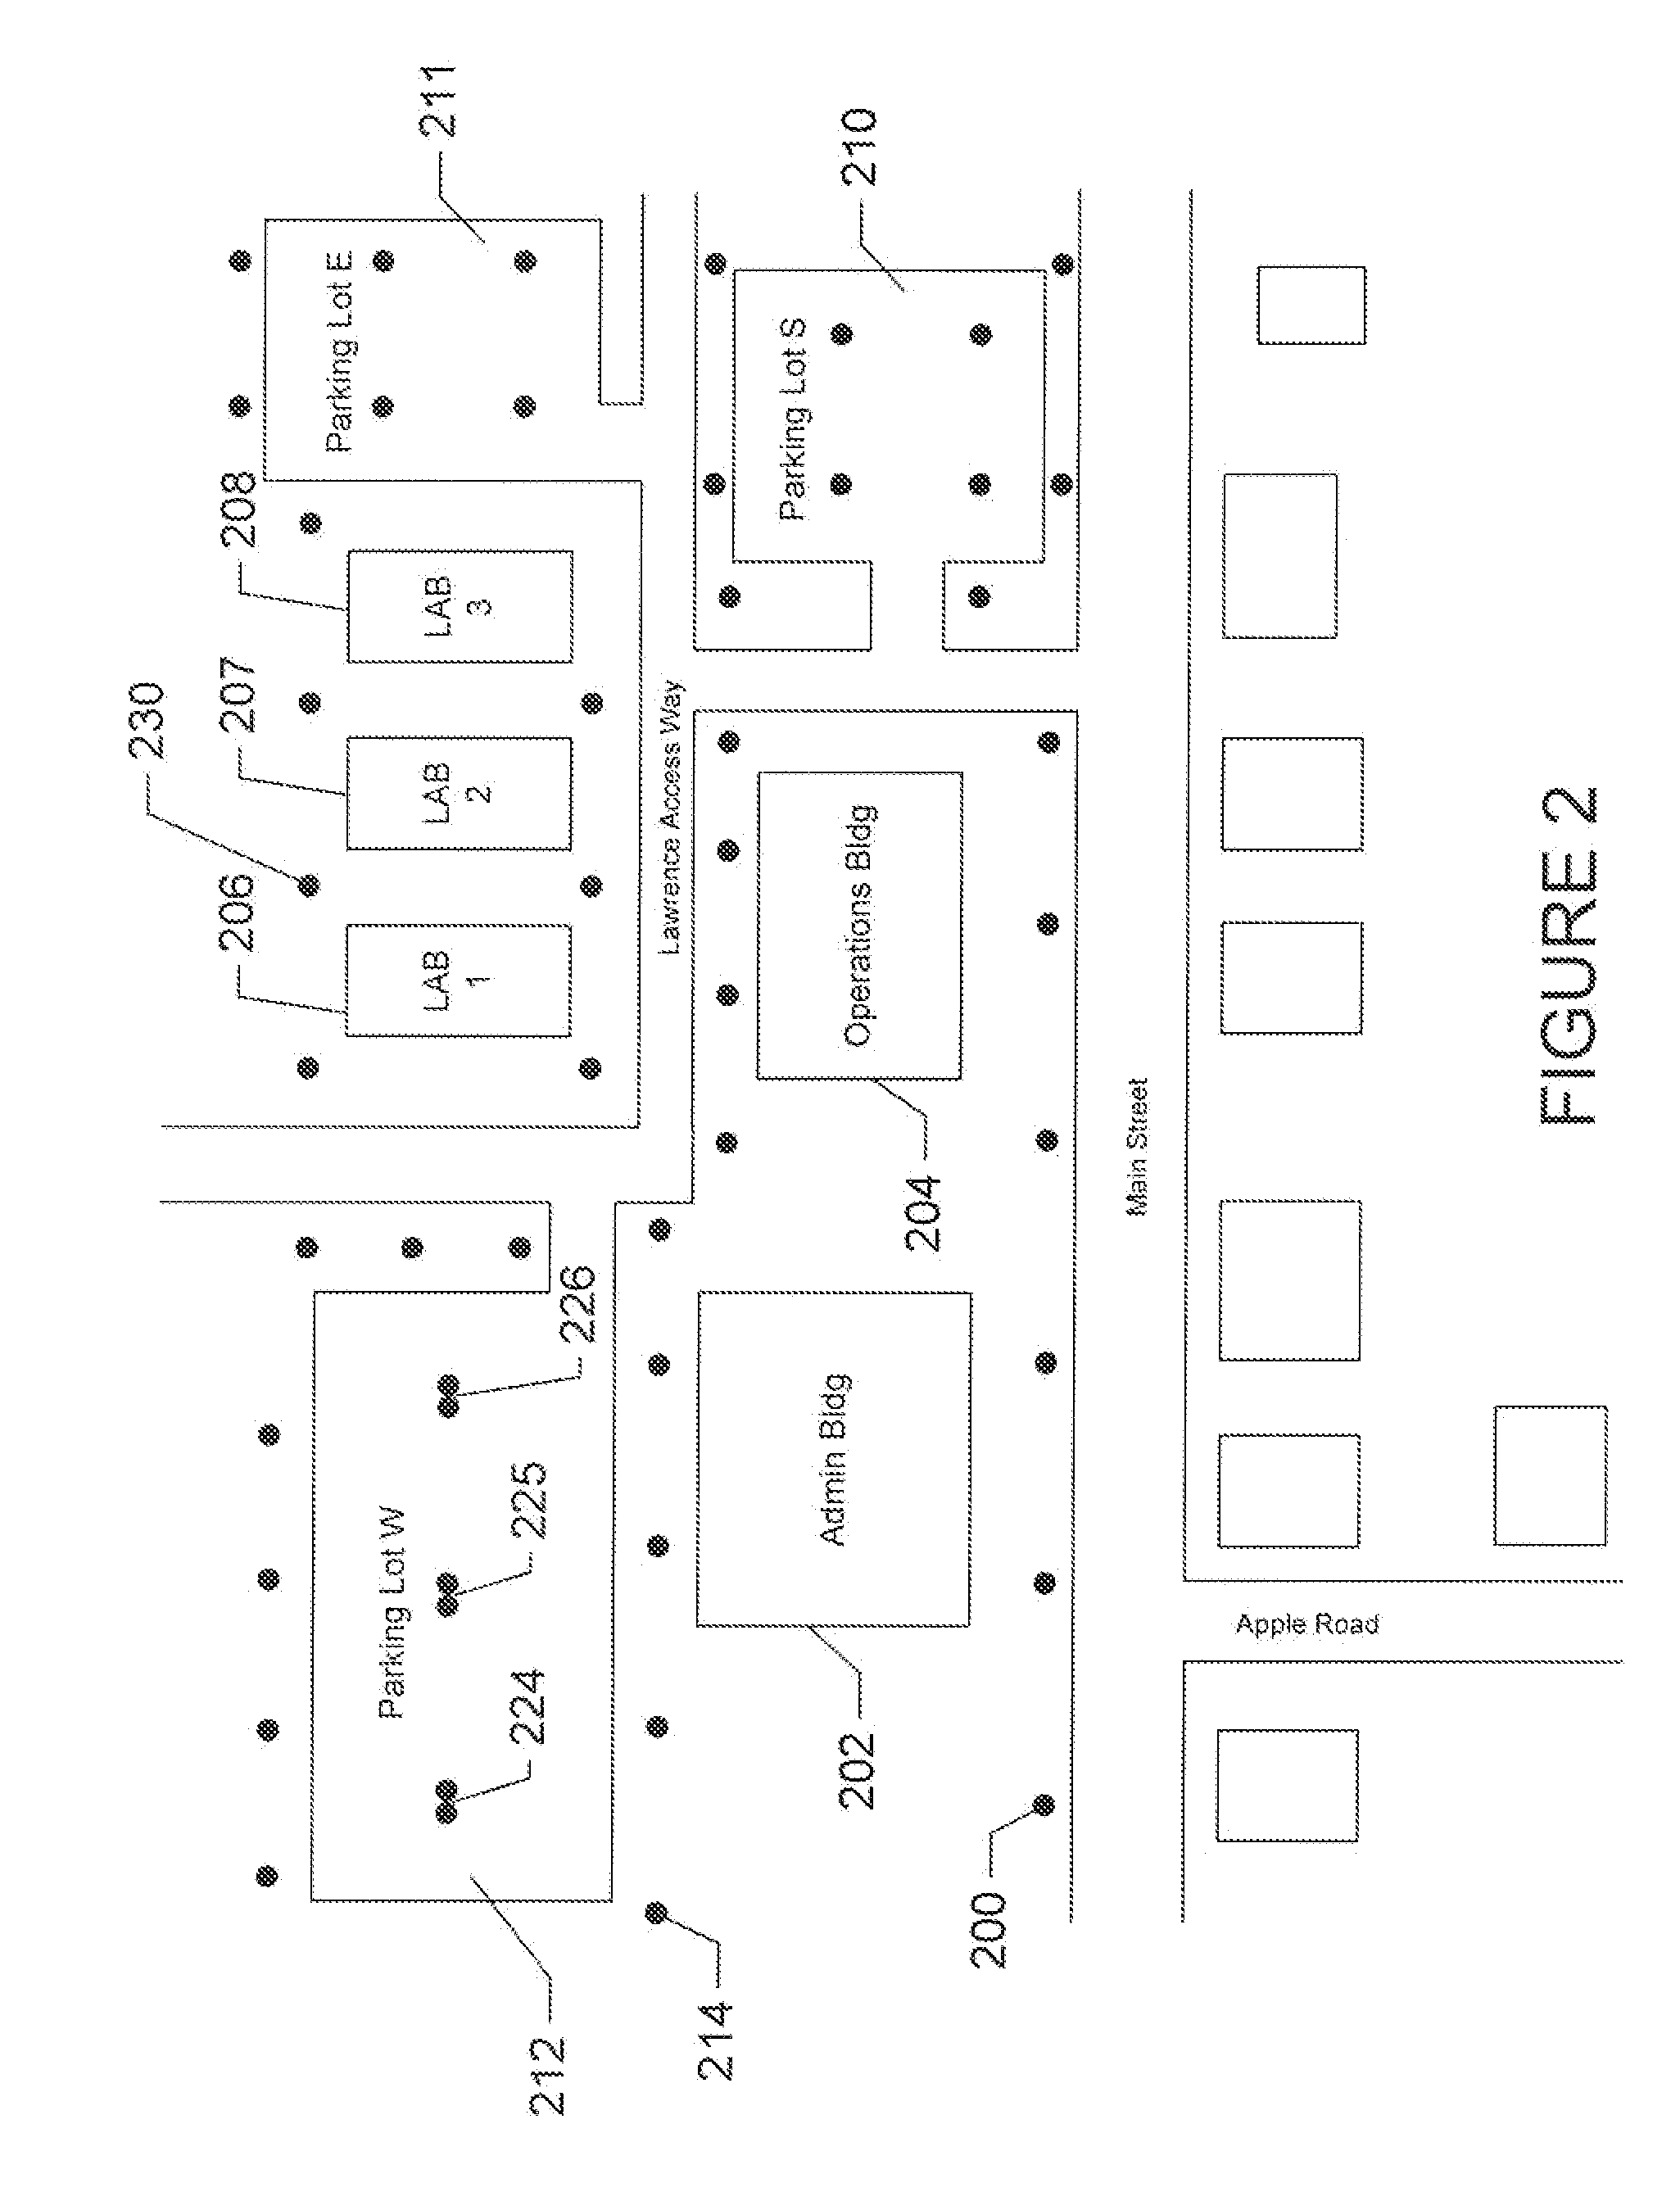 Method and system for automated lighting control and monitoring